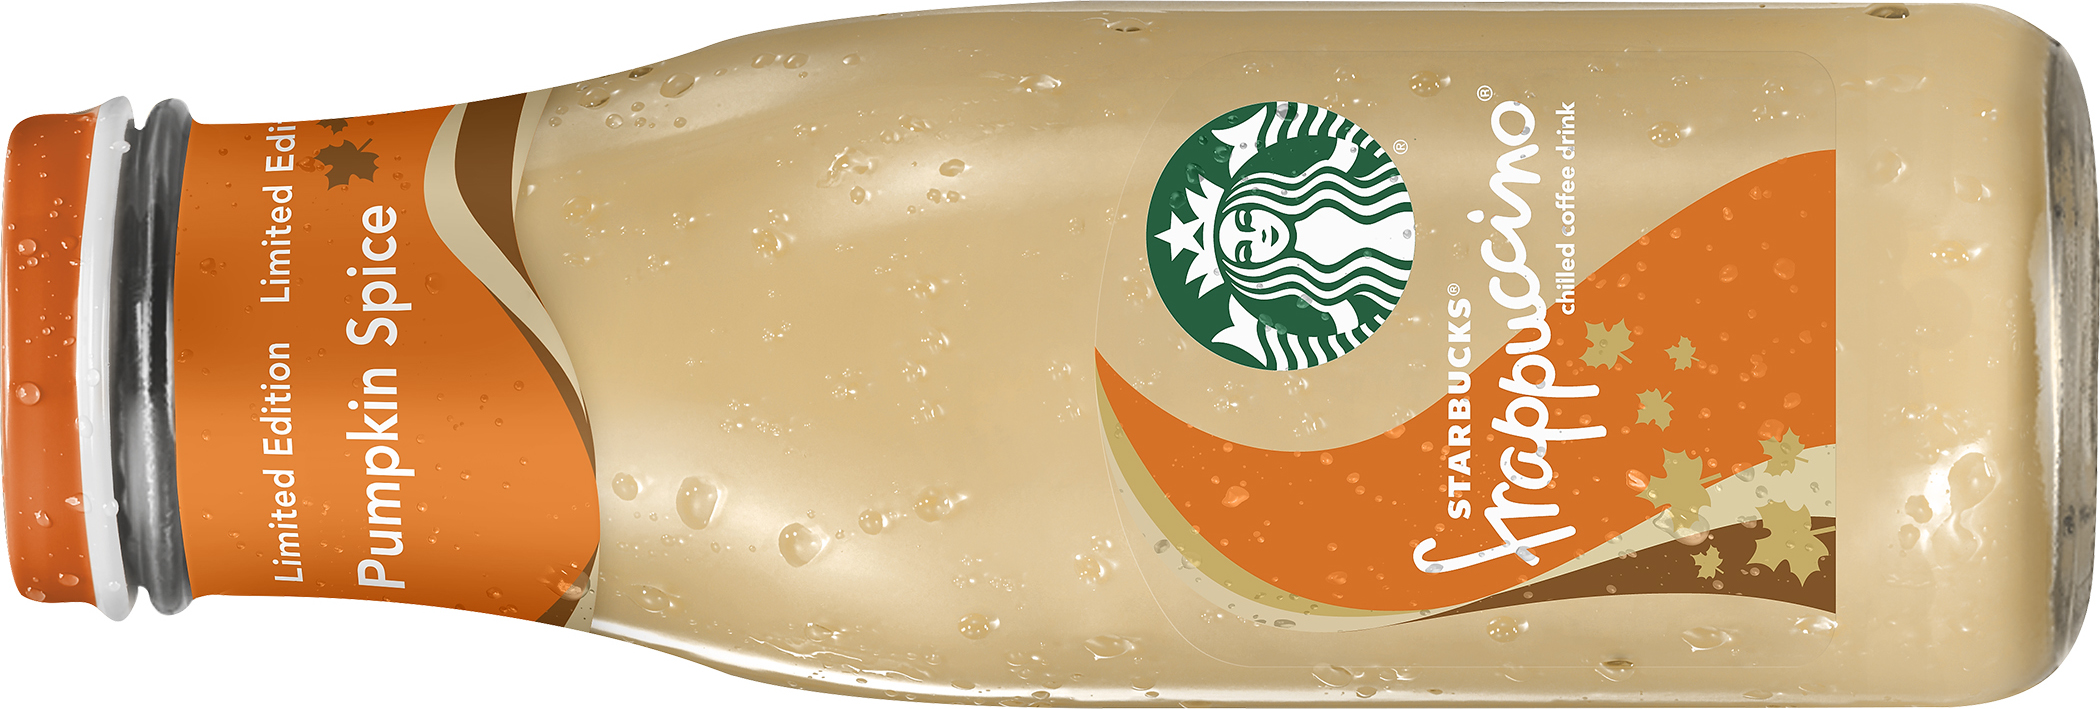 Bottled Starbucks Pumpkin Spice Frappuccinos Will Be Everywhere, Not Just Costco